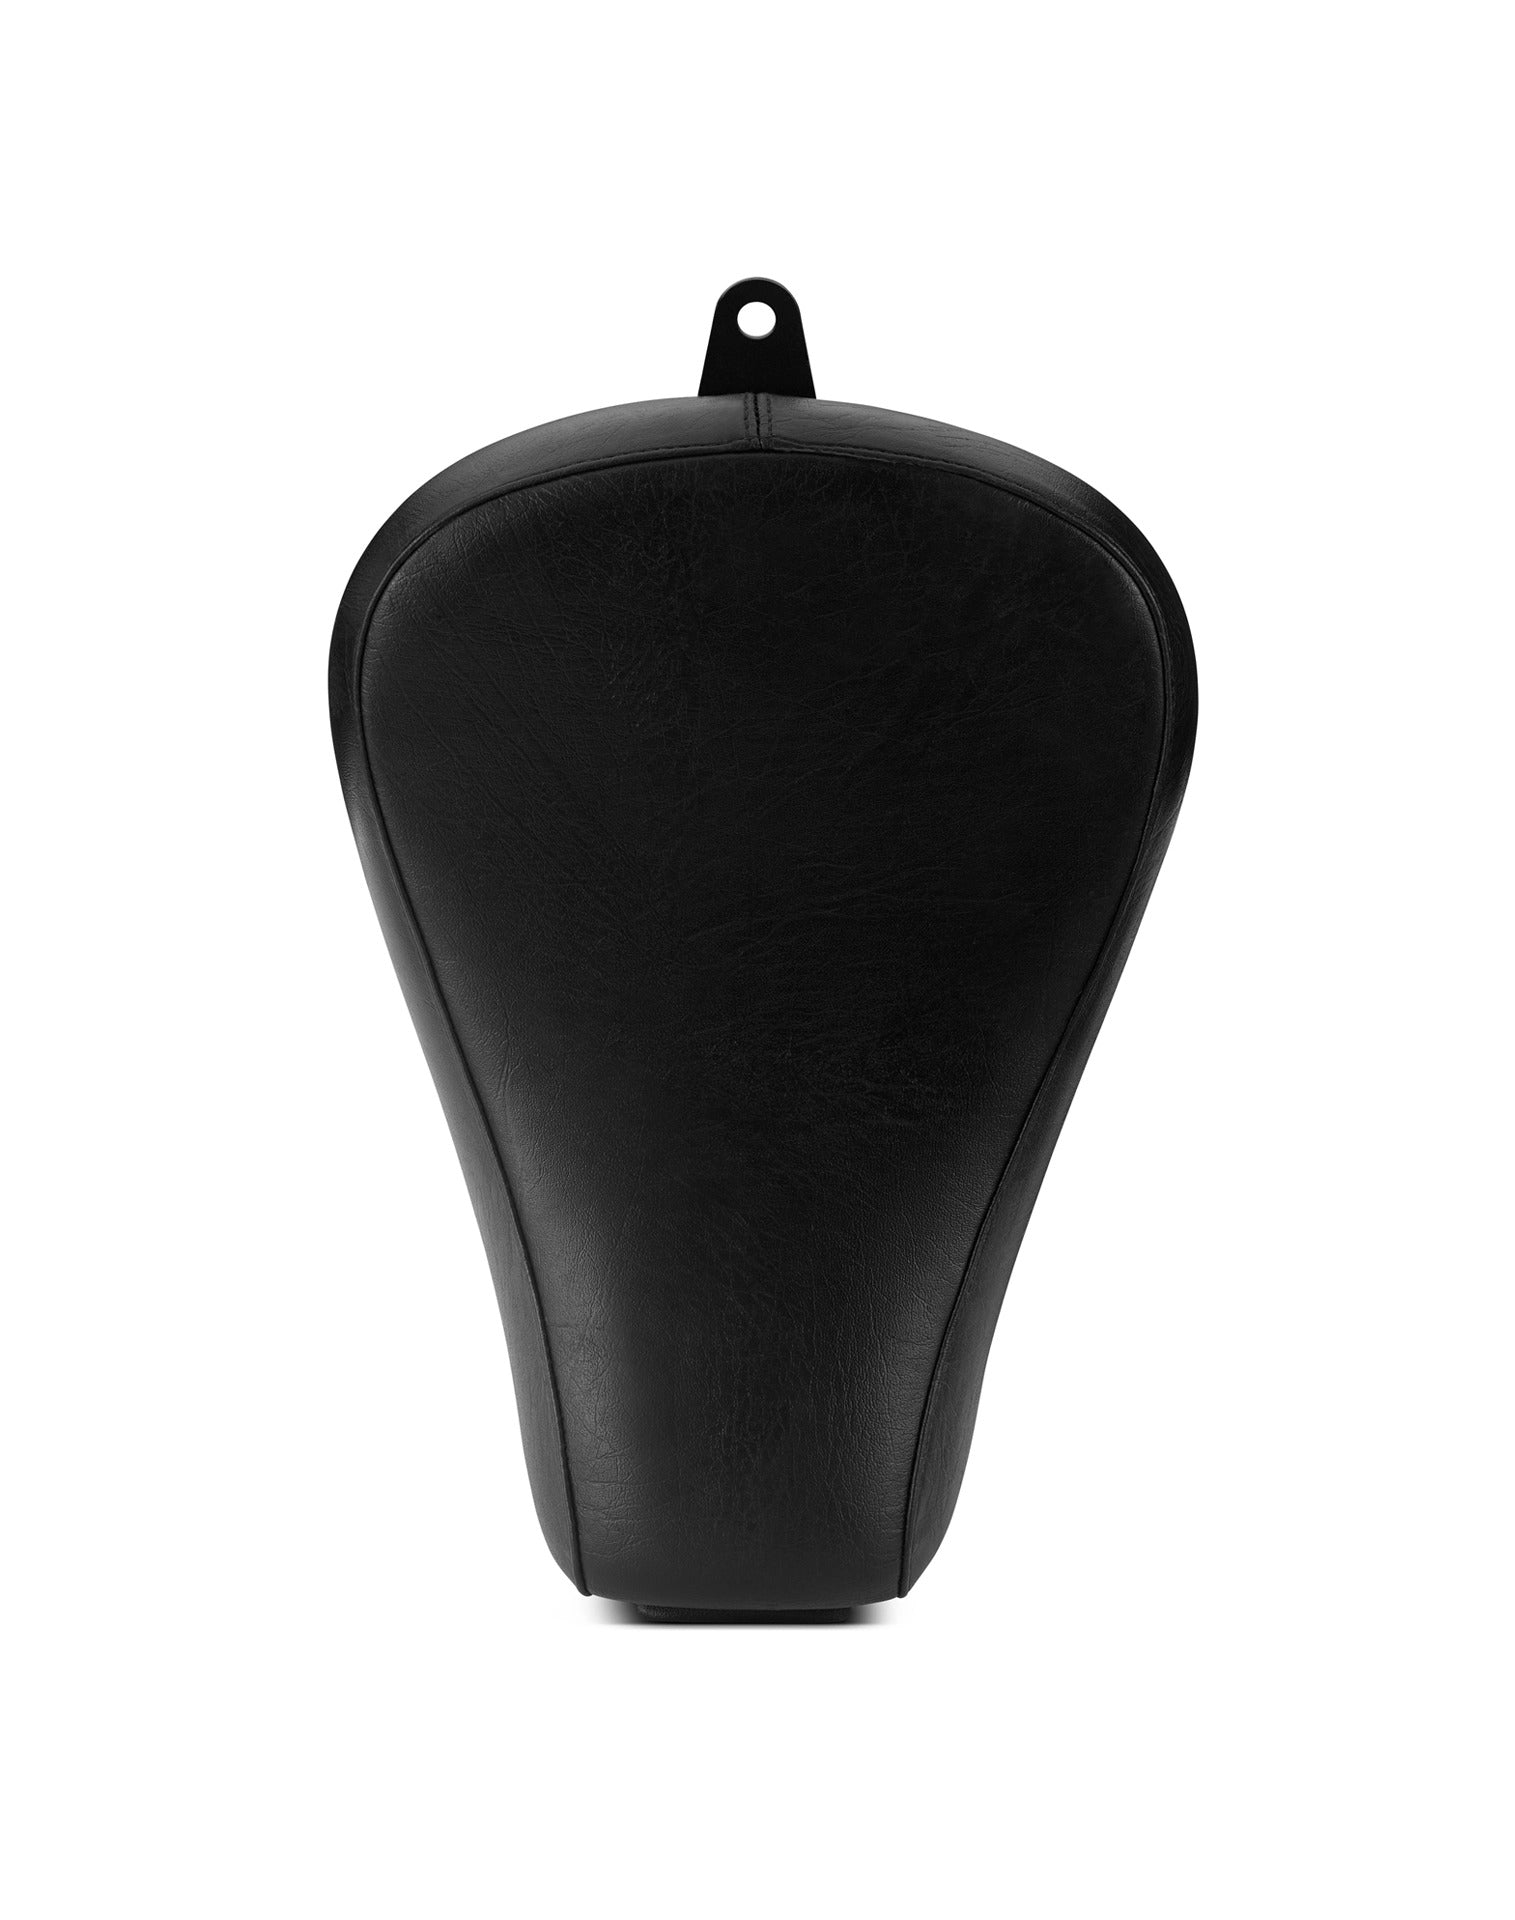 Iron Born Plain Design Motorcycle Solo Seat for Sportster Seventy Two 